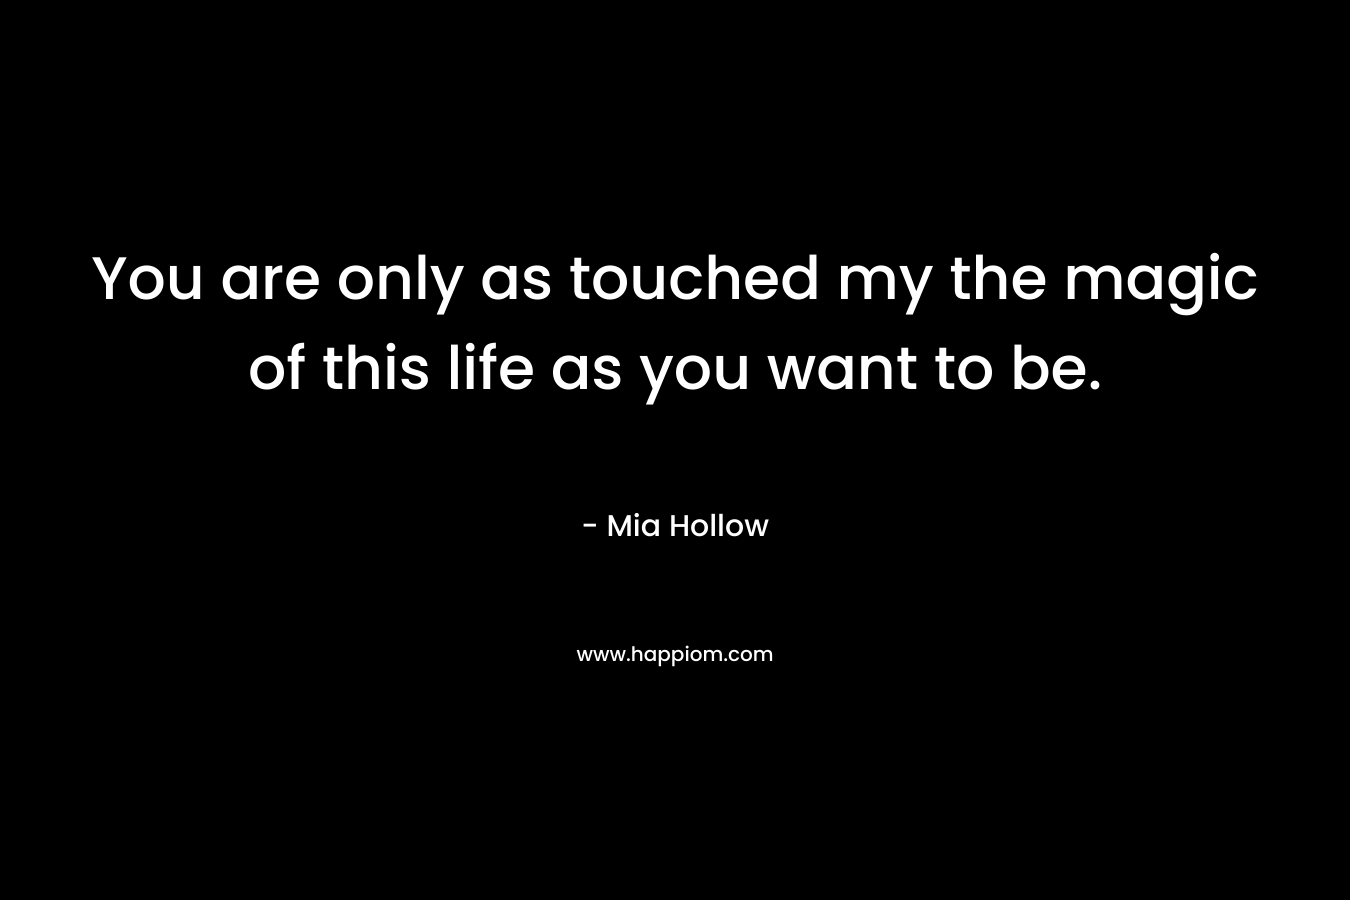 You are only as touched my the magic of this life as you want to be. – Mia Hollow